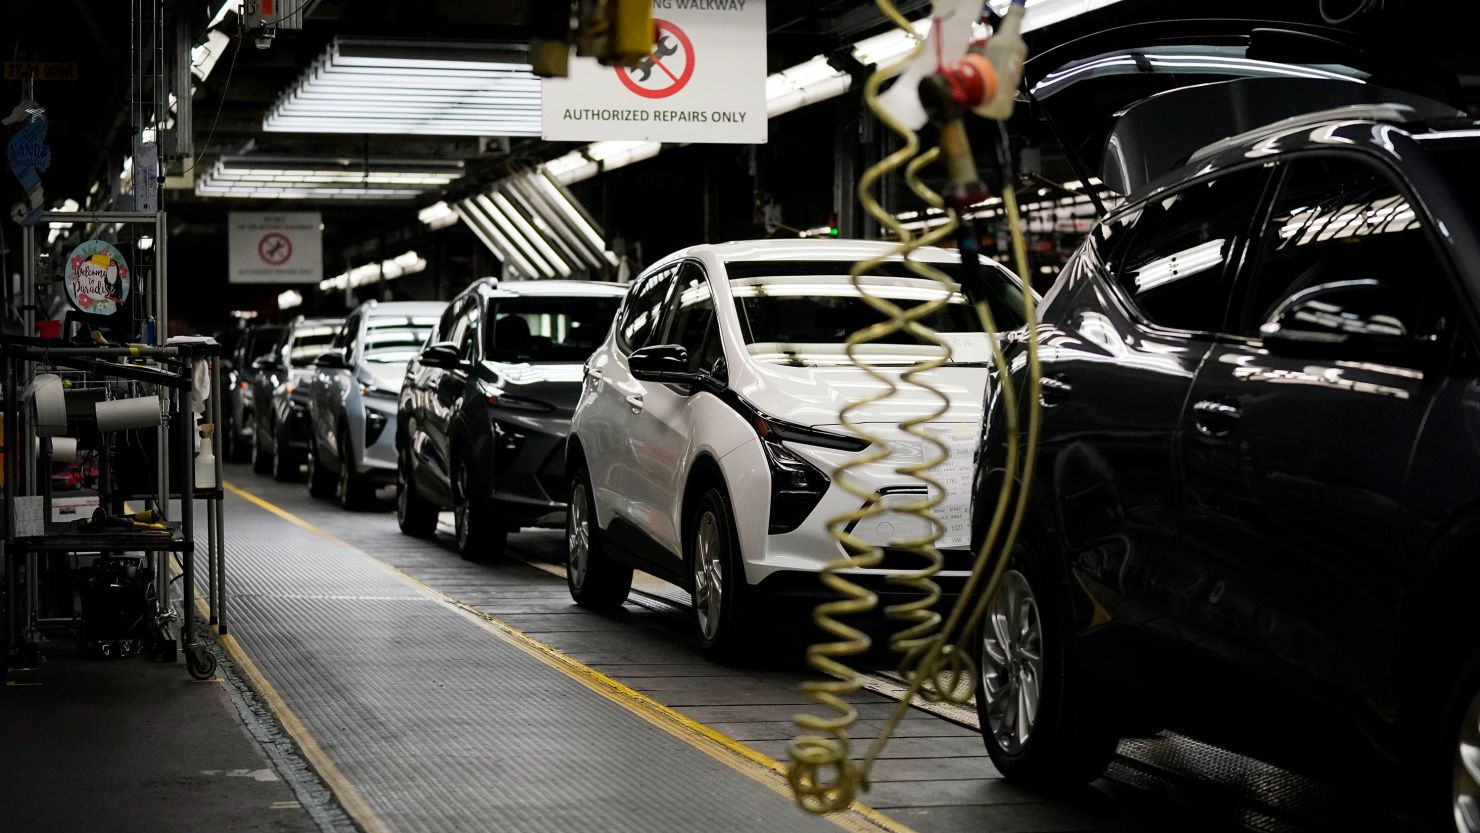 The 2023 Chevrolet Bolt EV and EUV assembly line is seen at the General Motors Orion Assembly, Thursday, June 15, 2023, in Lake Orion, Mich. (AP Photo/Carlos Osorio)